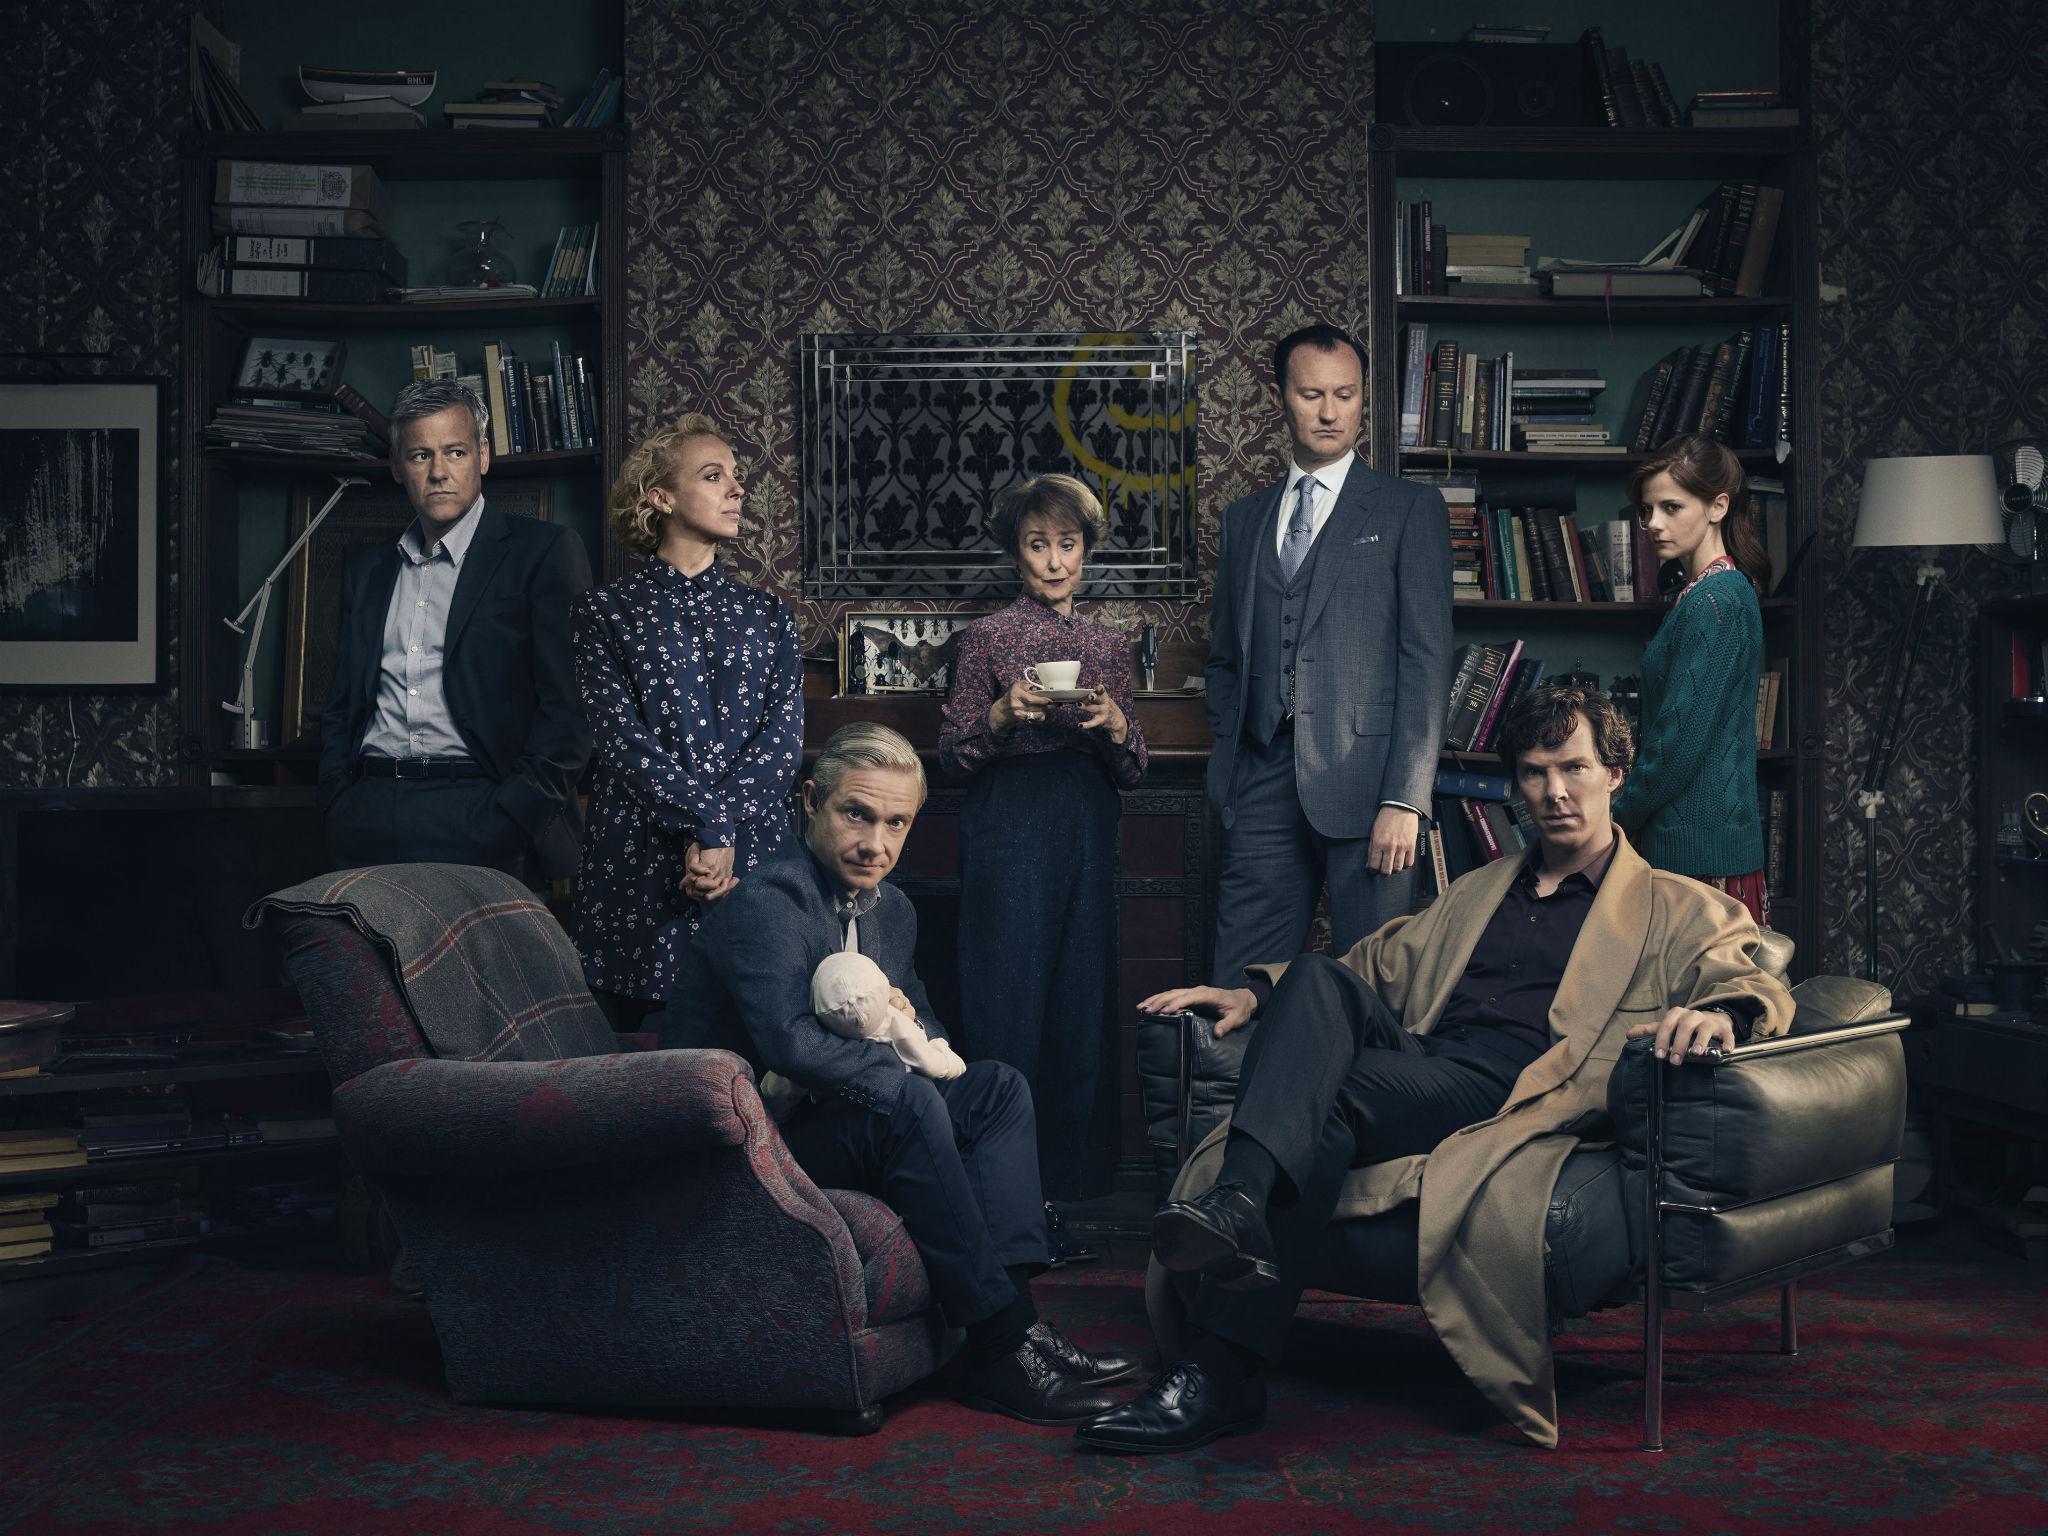 The show, starring Benedict Cumberbatch and Martin Freeman, airs in at least 240 territories across the globe